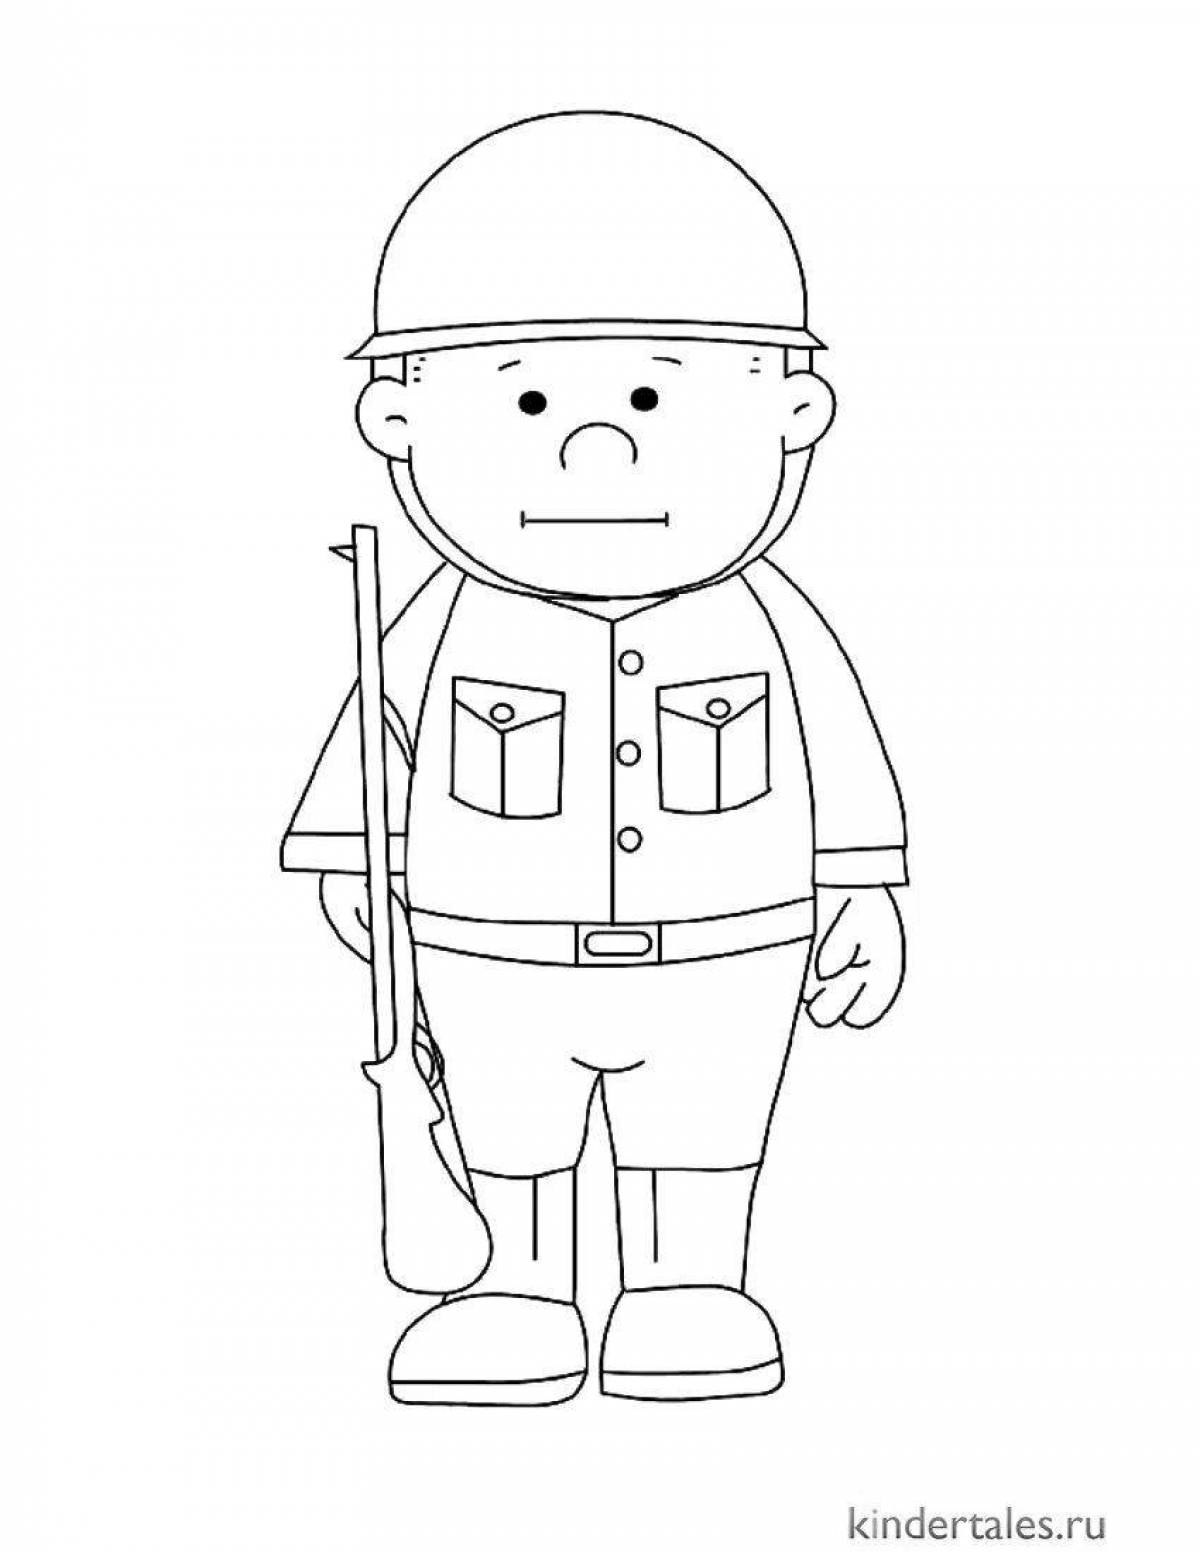 Funny toy soldiers coloring for kids